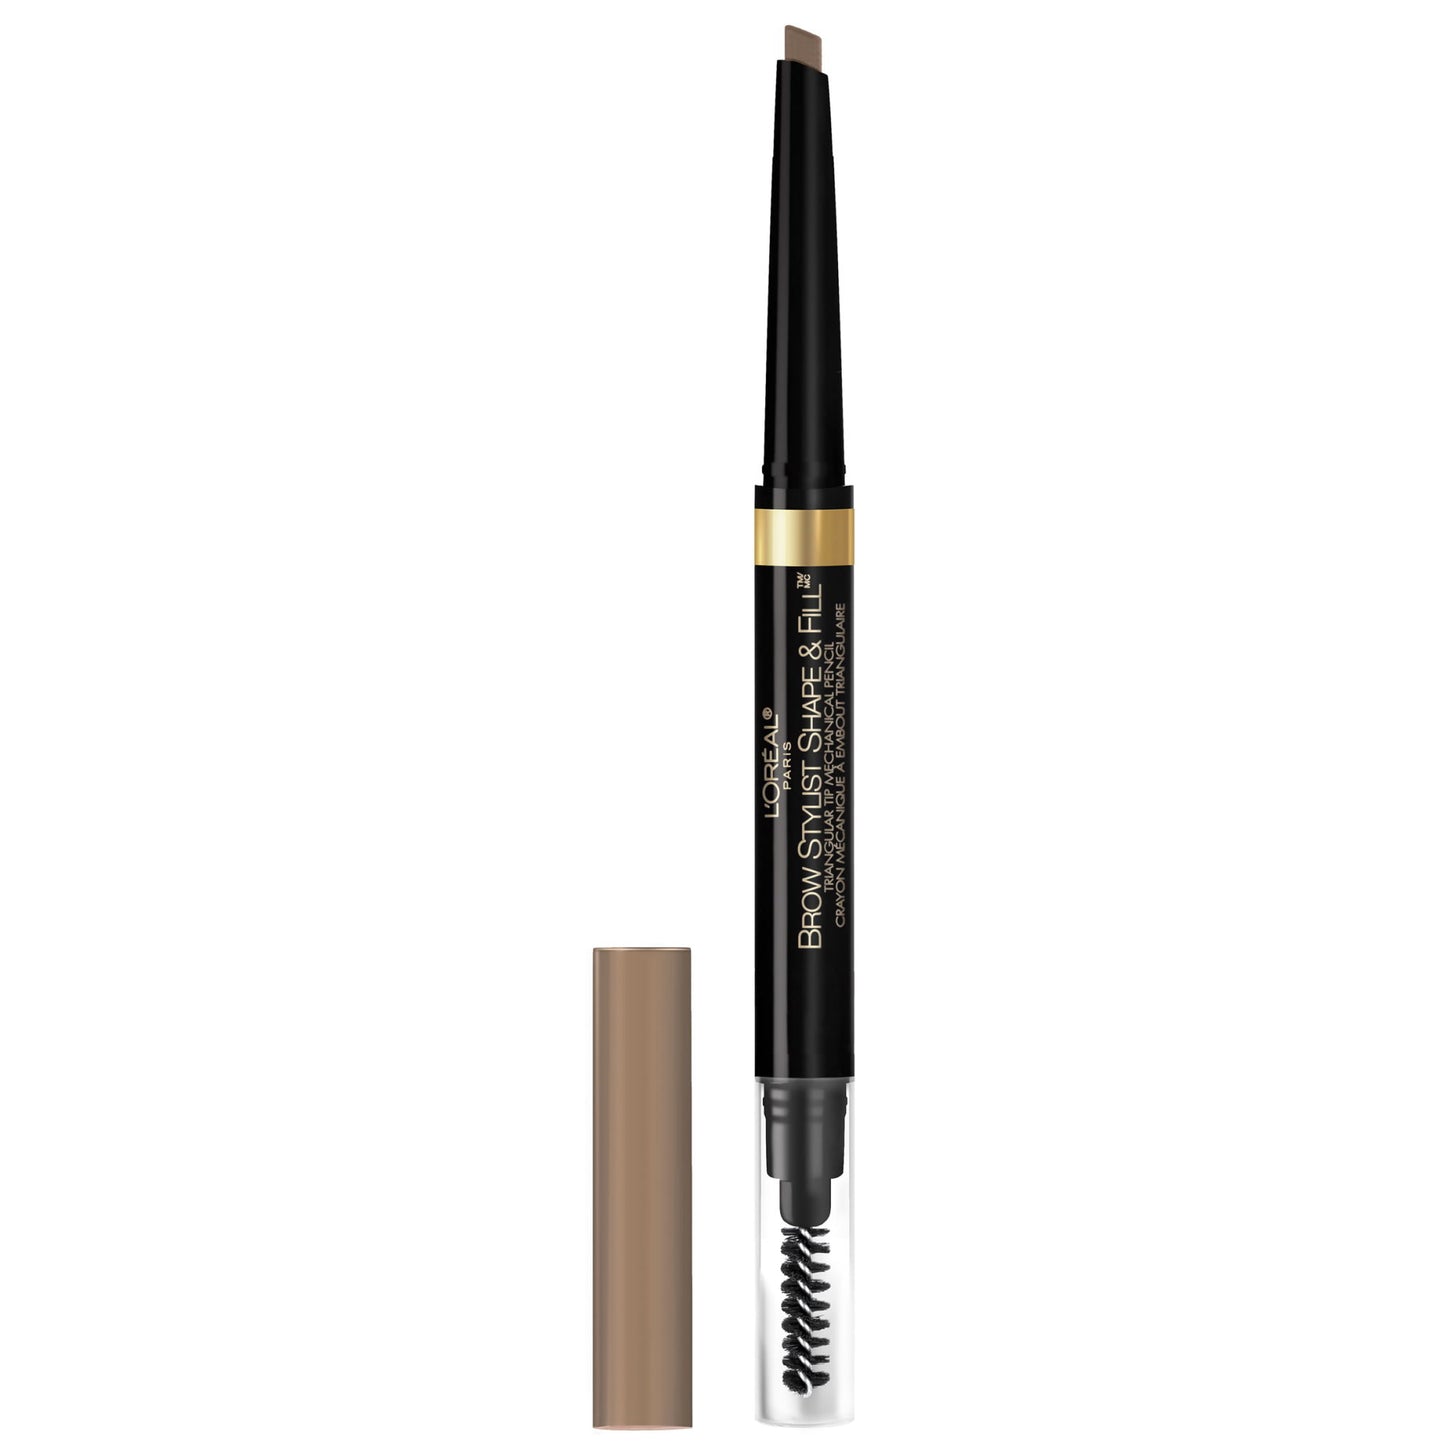 L'Oreal Paris Stylist Shape and Fill Mechanical Eyebrow Pencil, Blonde